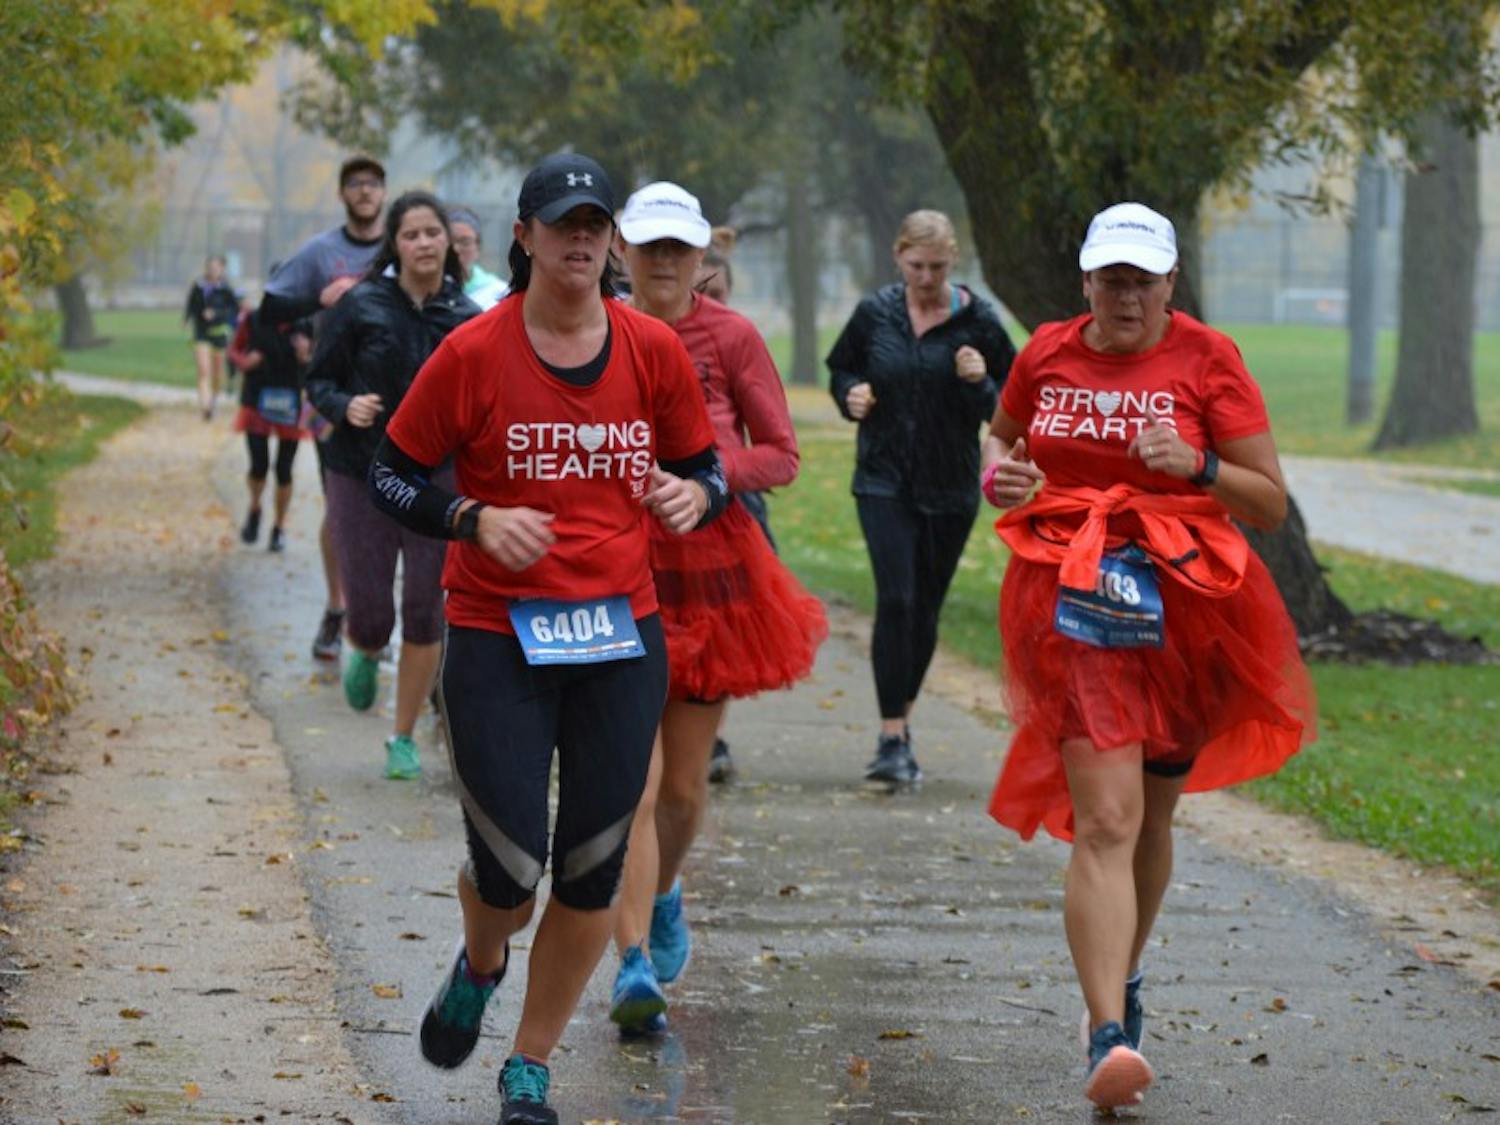 Cardiac Campus'&nbsp;Red Tutu Trot 5K at the Howard Temin Lakeshore Path raised over $9,000 that will fund the CPR training of UW-Madison students.